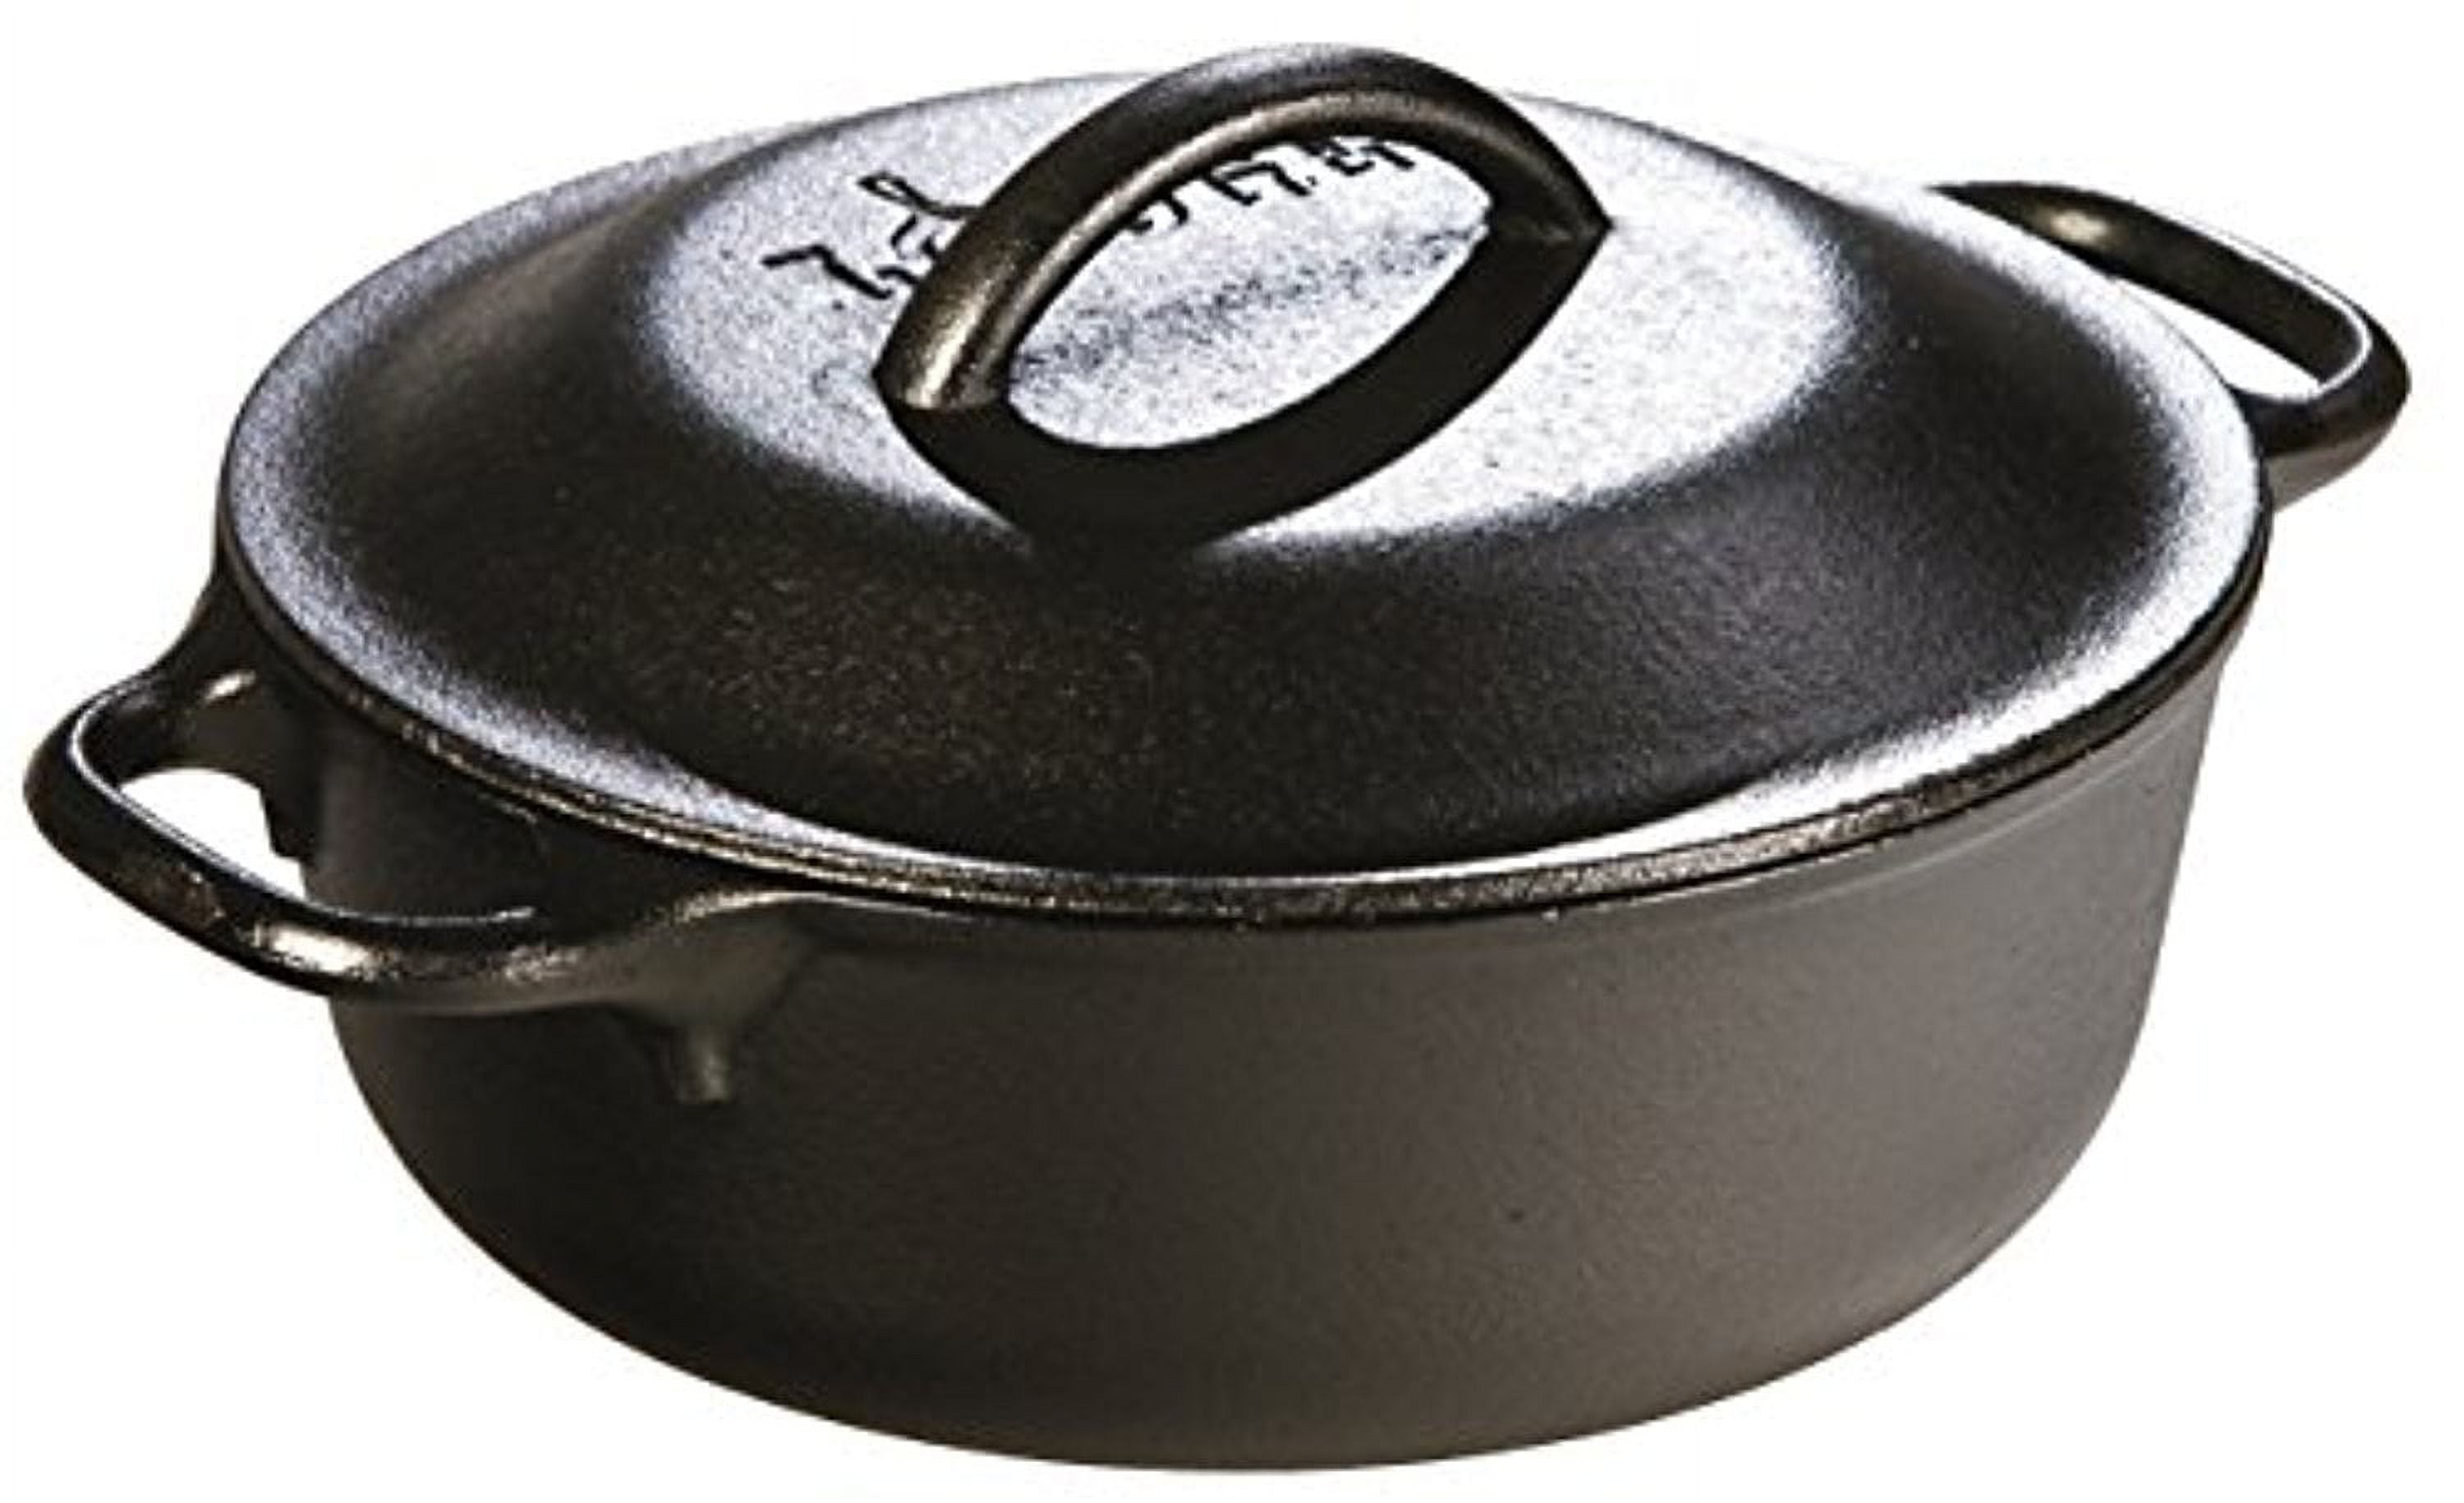 Cast iron soup pot • Compare & find best prices today »